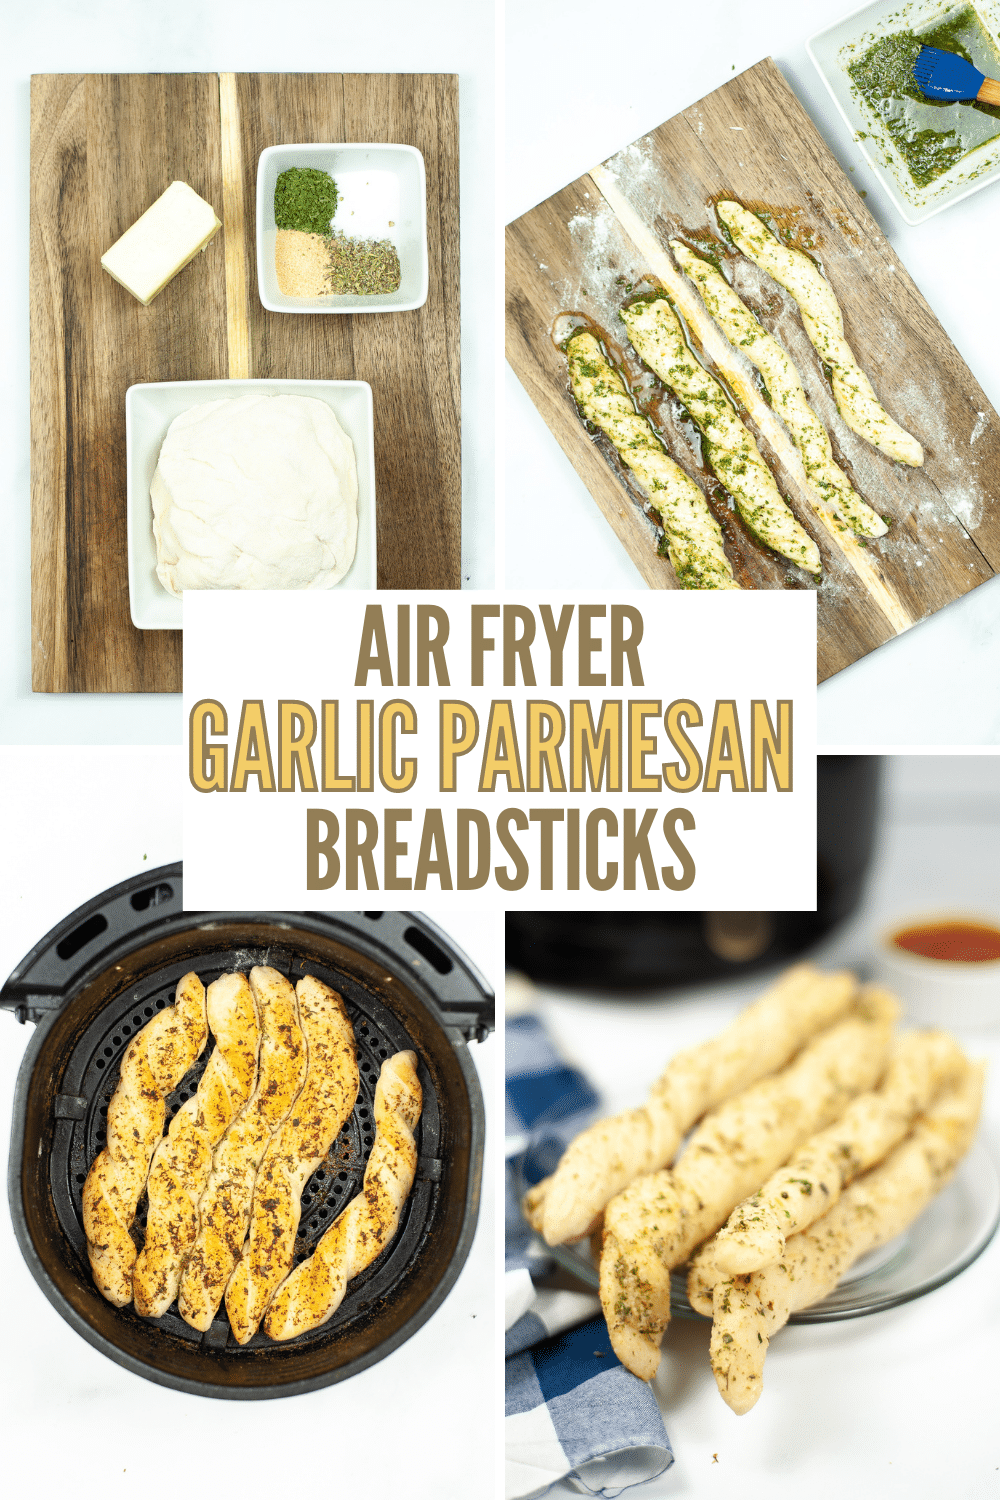 These Air Fryer Breadsticks are simple to make and so delicious! They’re crispy on the outside, and soft on the inside. A perfect side dish! #airfryer #airfryerbreadsticks #garlicparmesanbreadsticks via @wondermomwannab